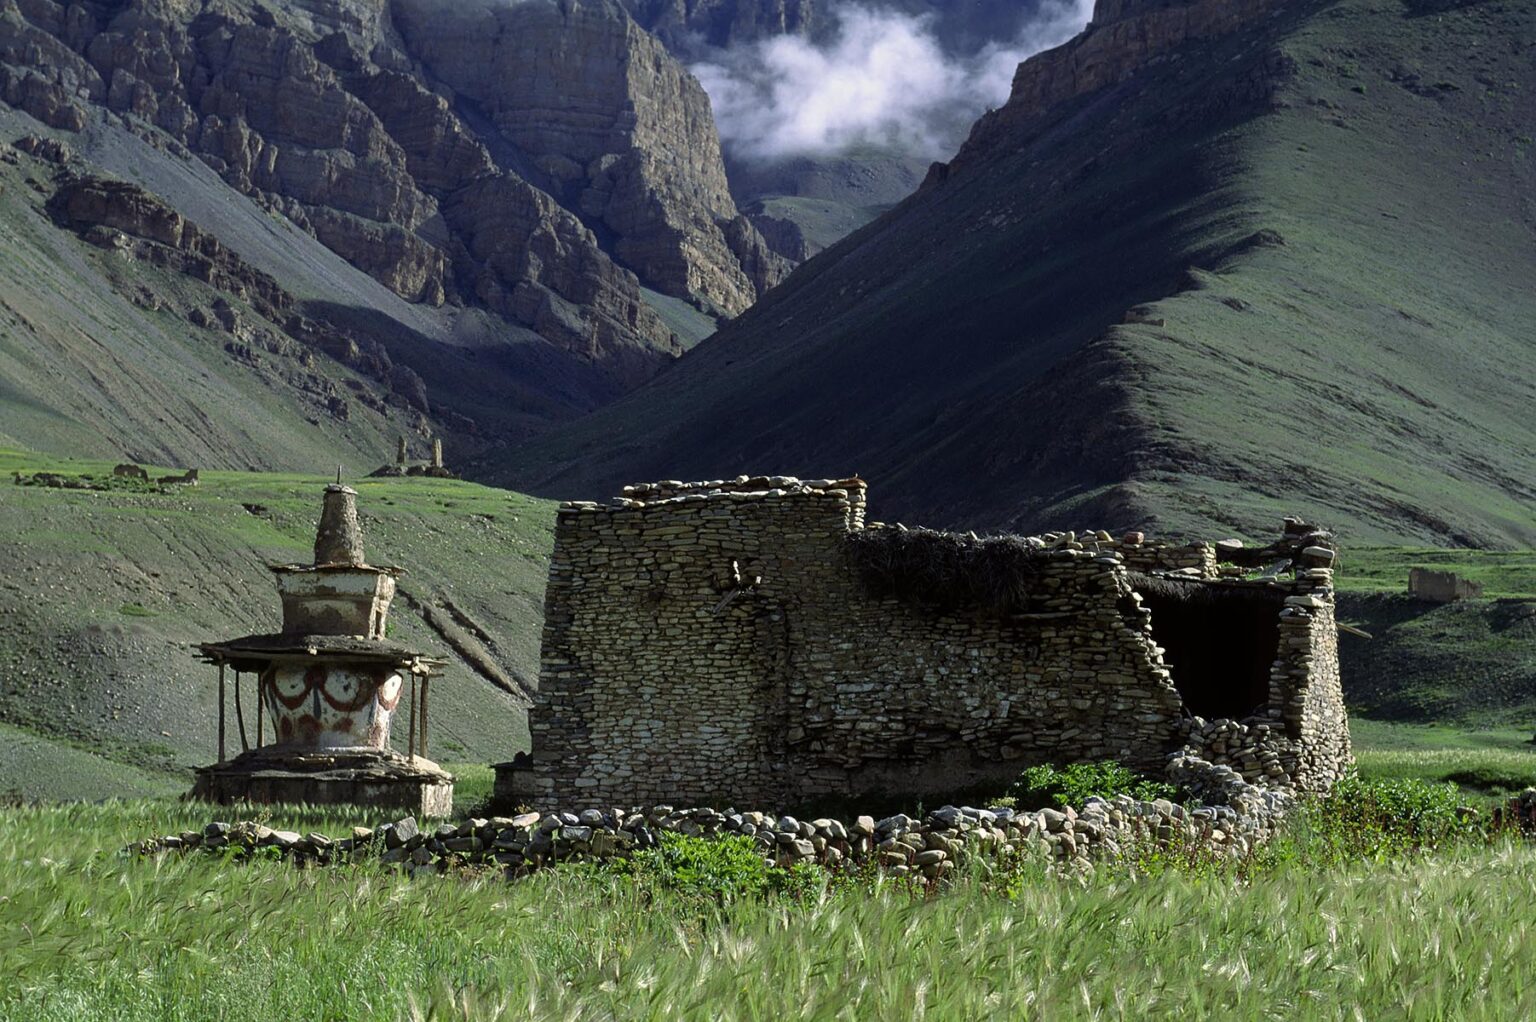 Tibetan Buddhist CHORTEN and RUINS of a farm house in the DO TARAP VALLEY - DOLPO DISTRICT, NEPAL